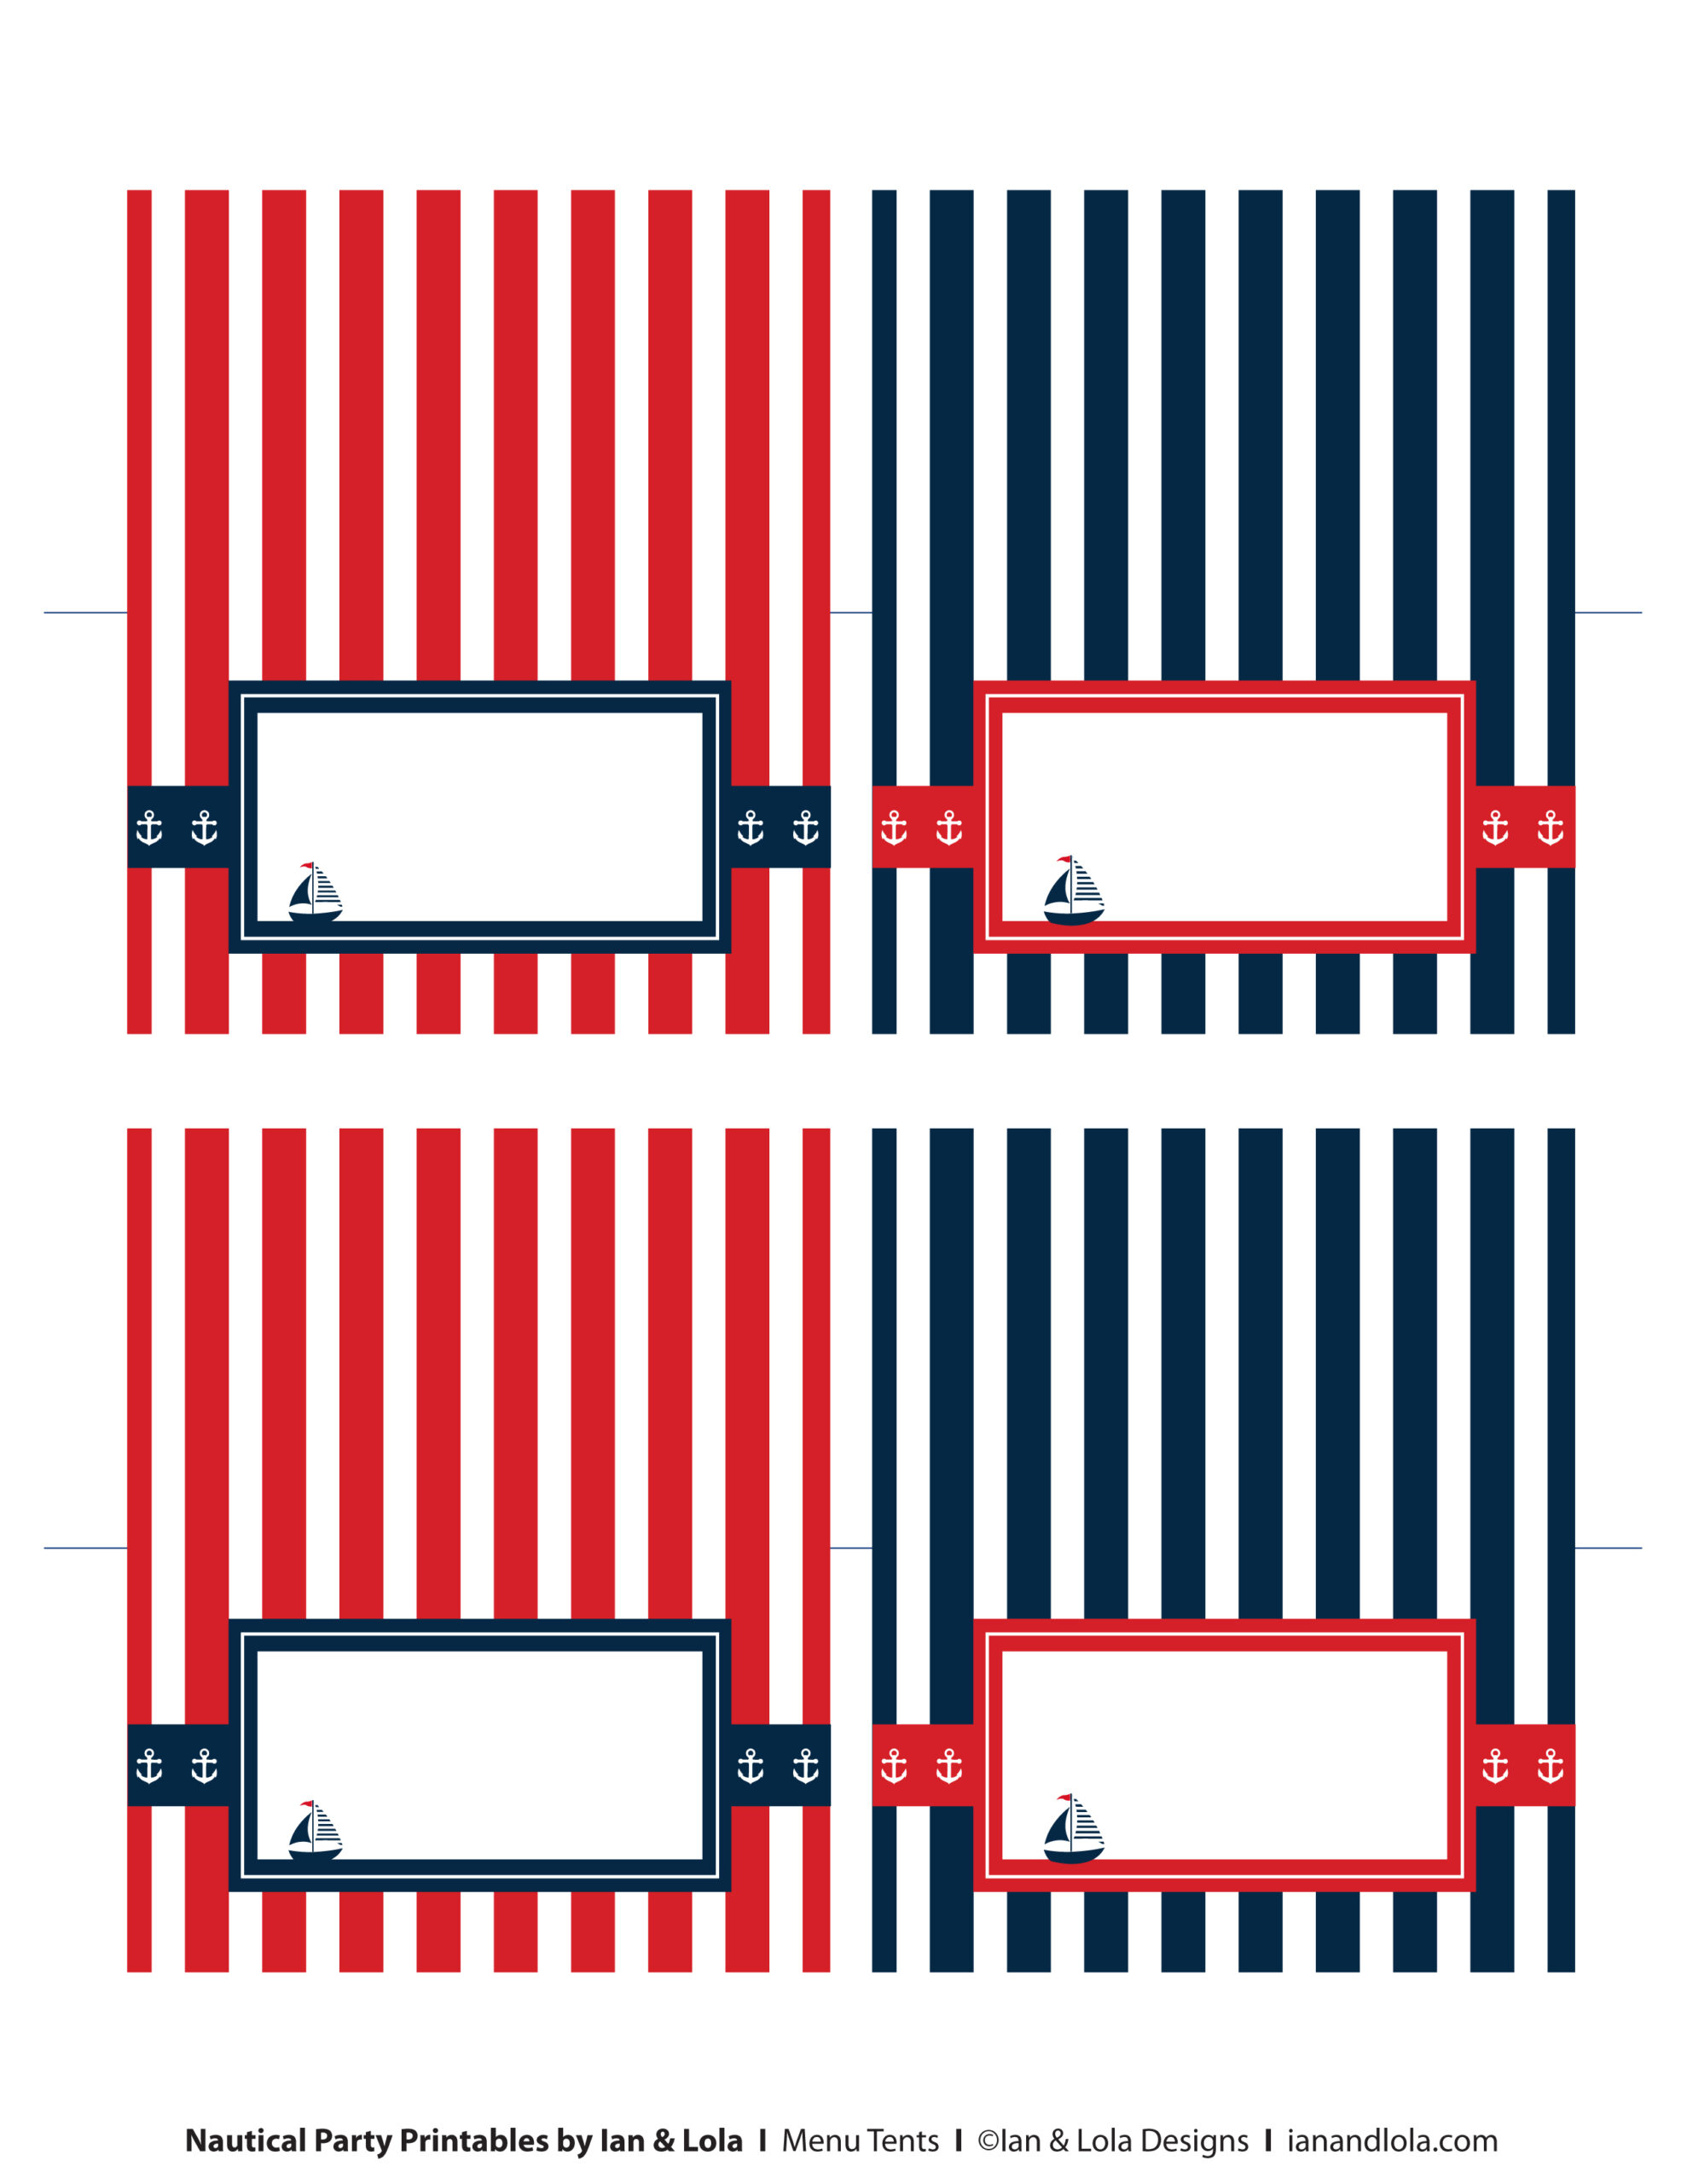 Free Nautical Party Printables From Ian & Lola Designs Regarding Nautical Banner Template